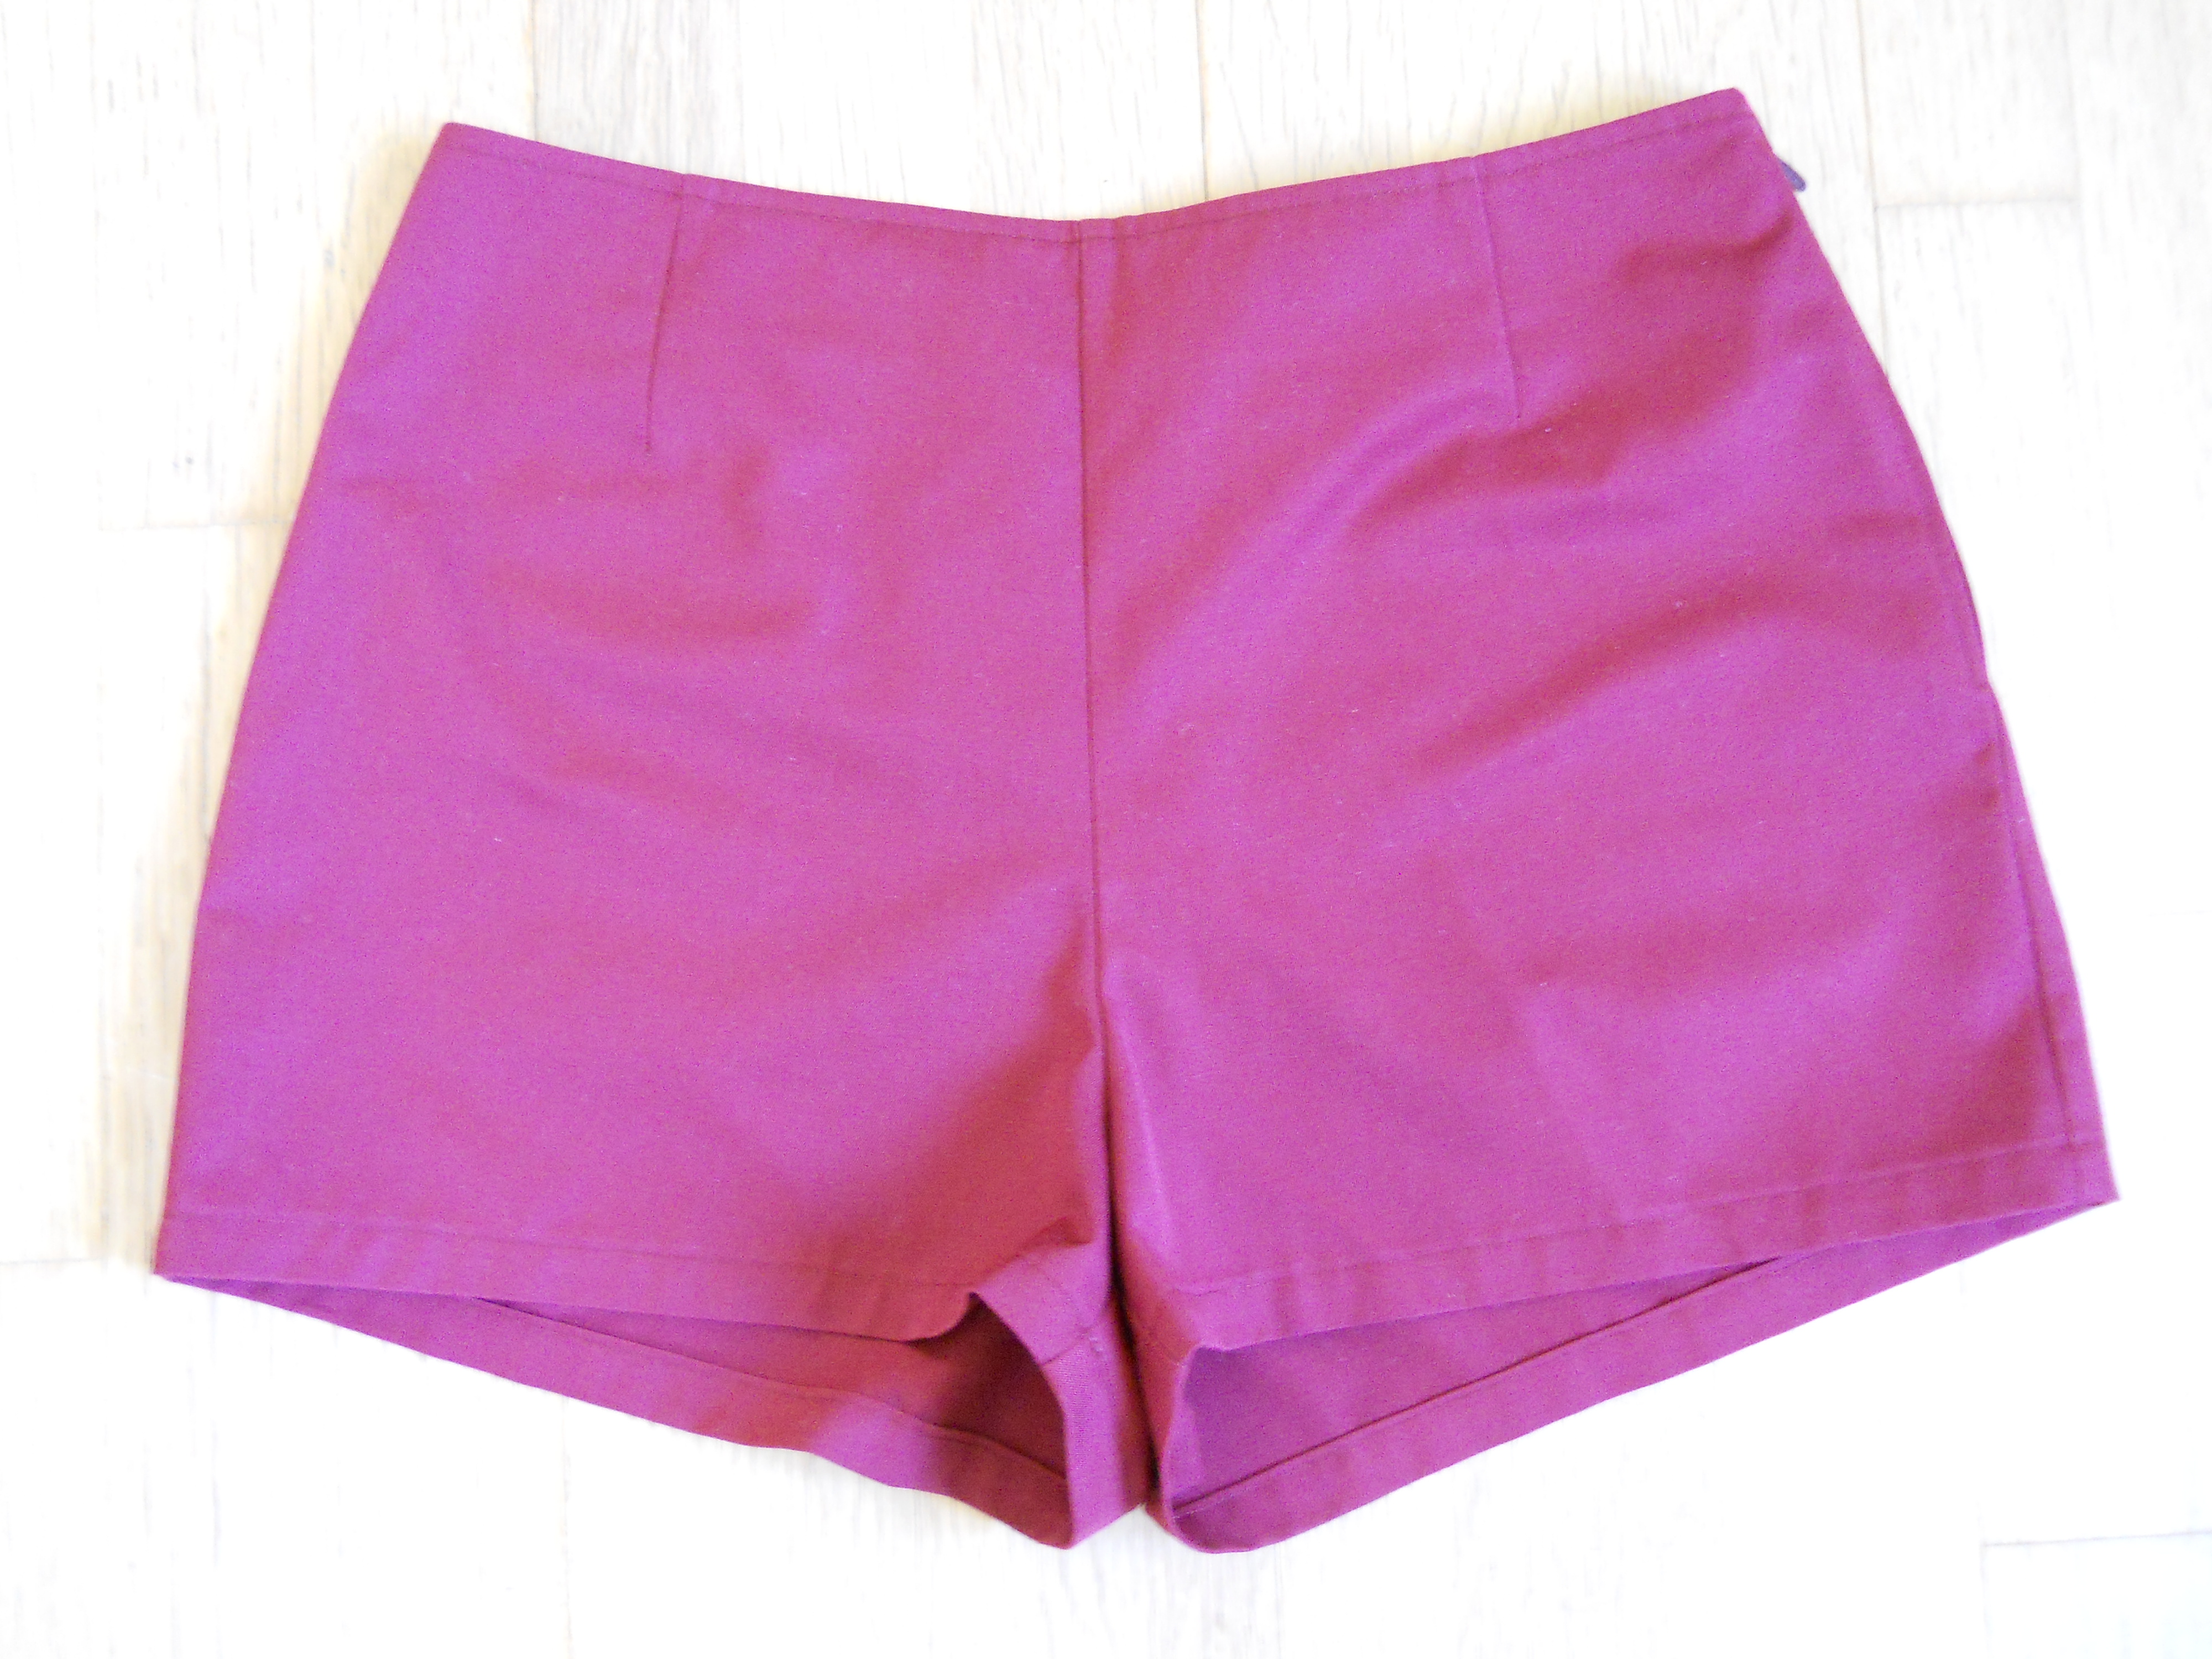 50-ies style shorts – Sewing Projects | BurdaStyle.com